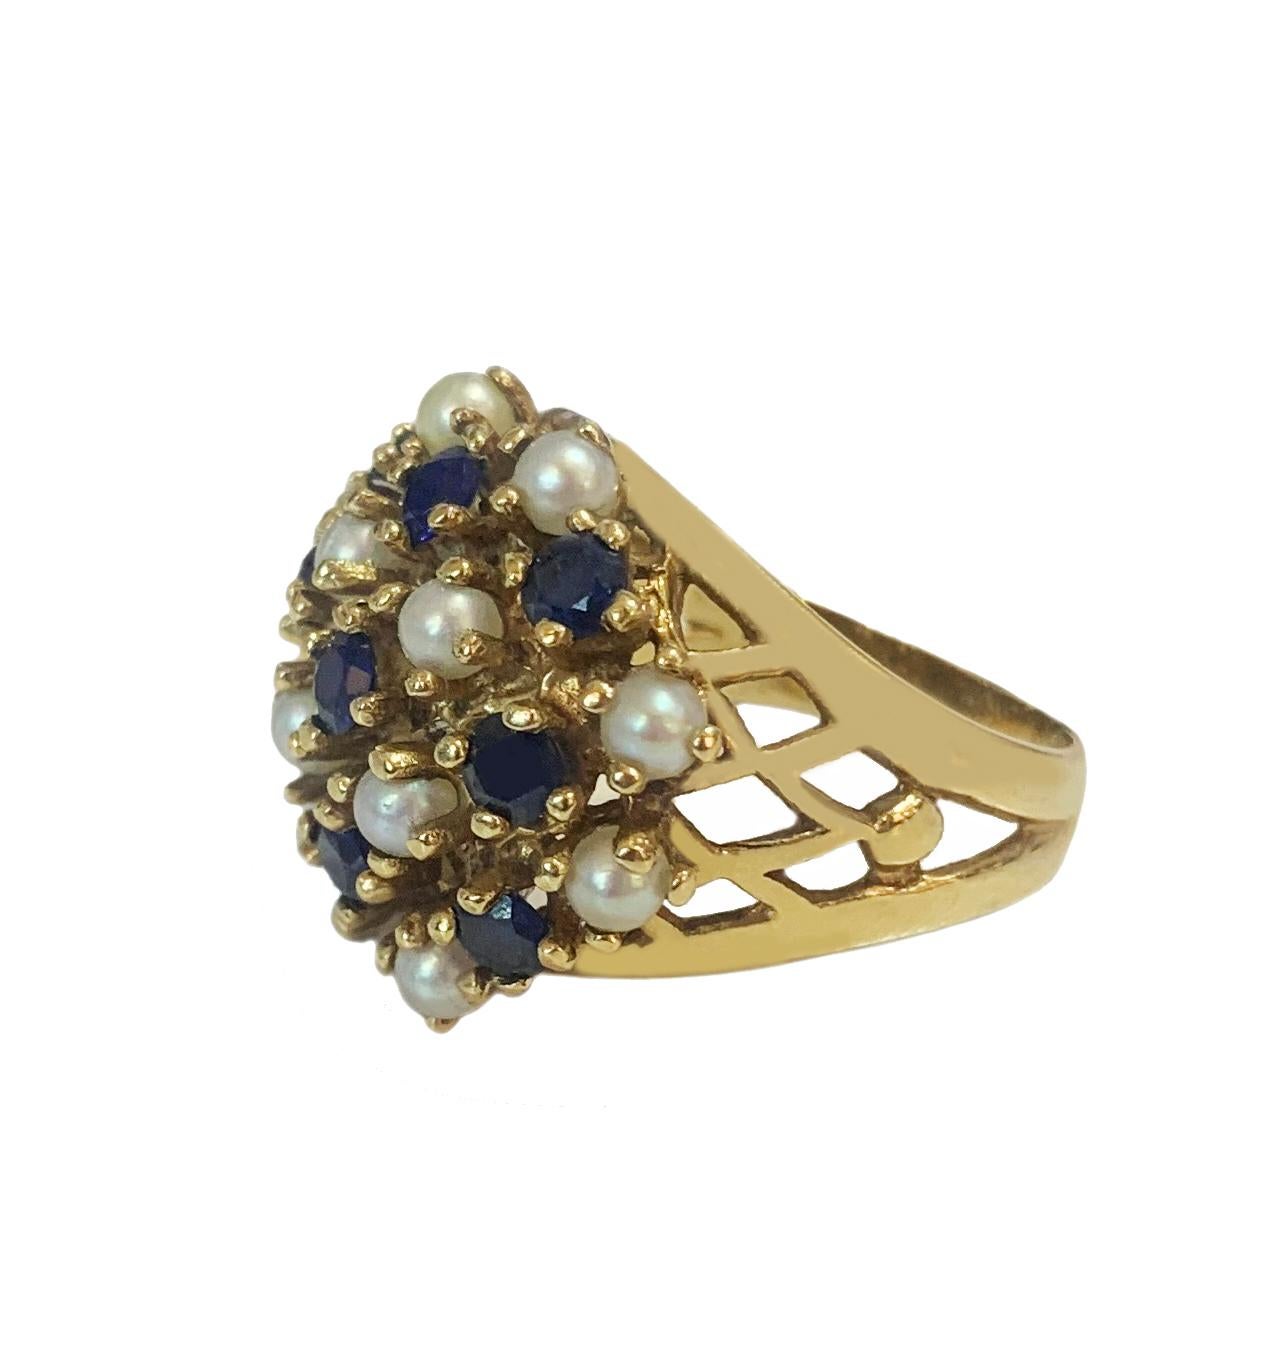 -14k Yellow Gold, Pearls, Sapphires

-Ring size: 7

-Weight: 8.19gr

-Sapphires:0.72ct